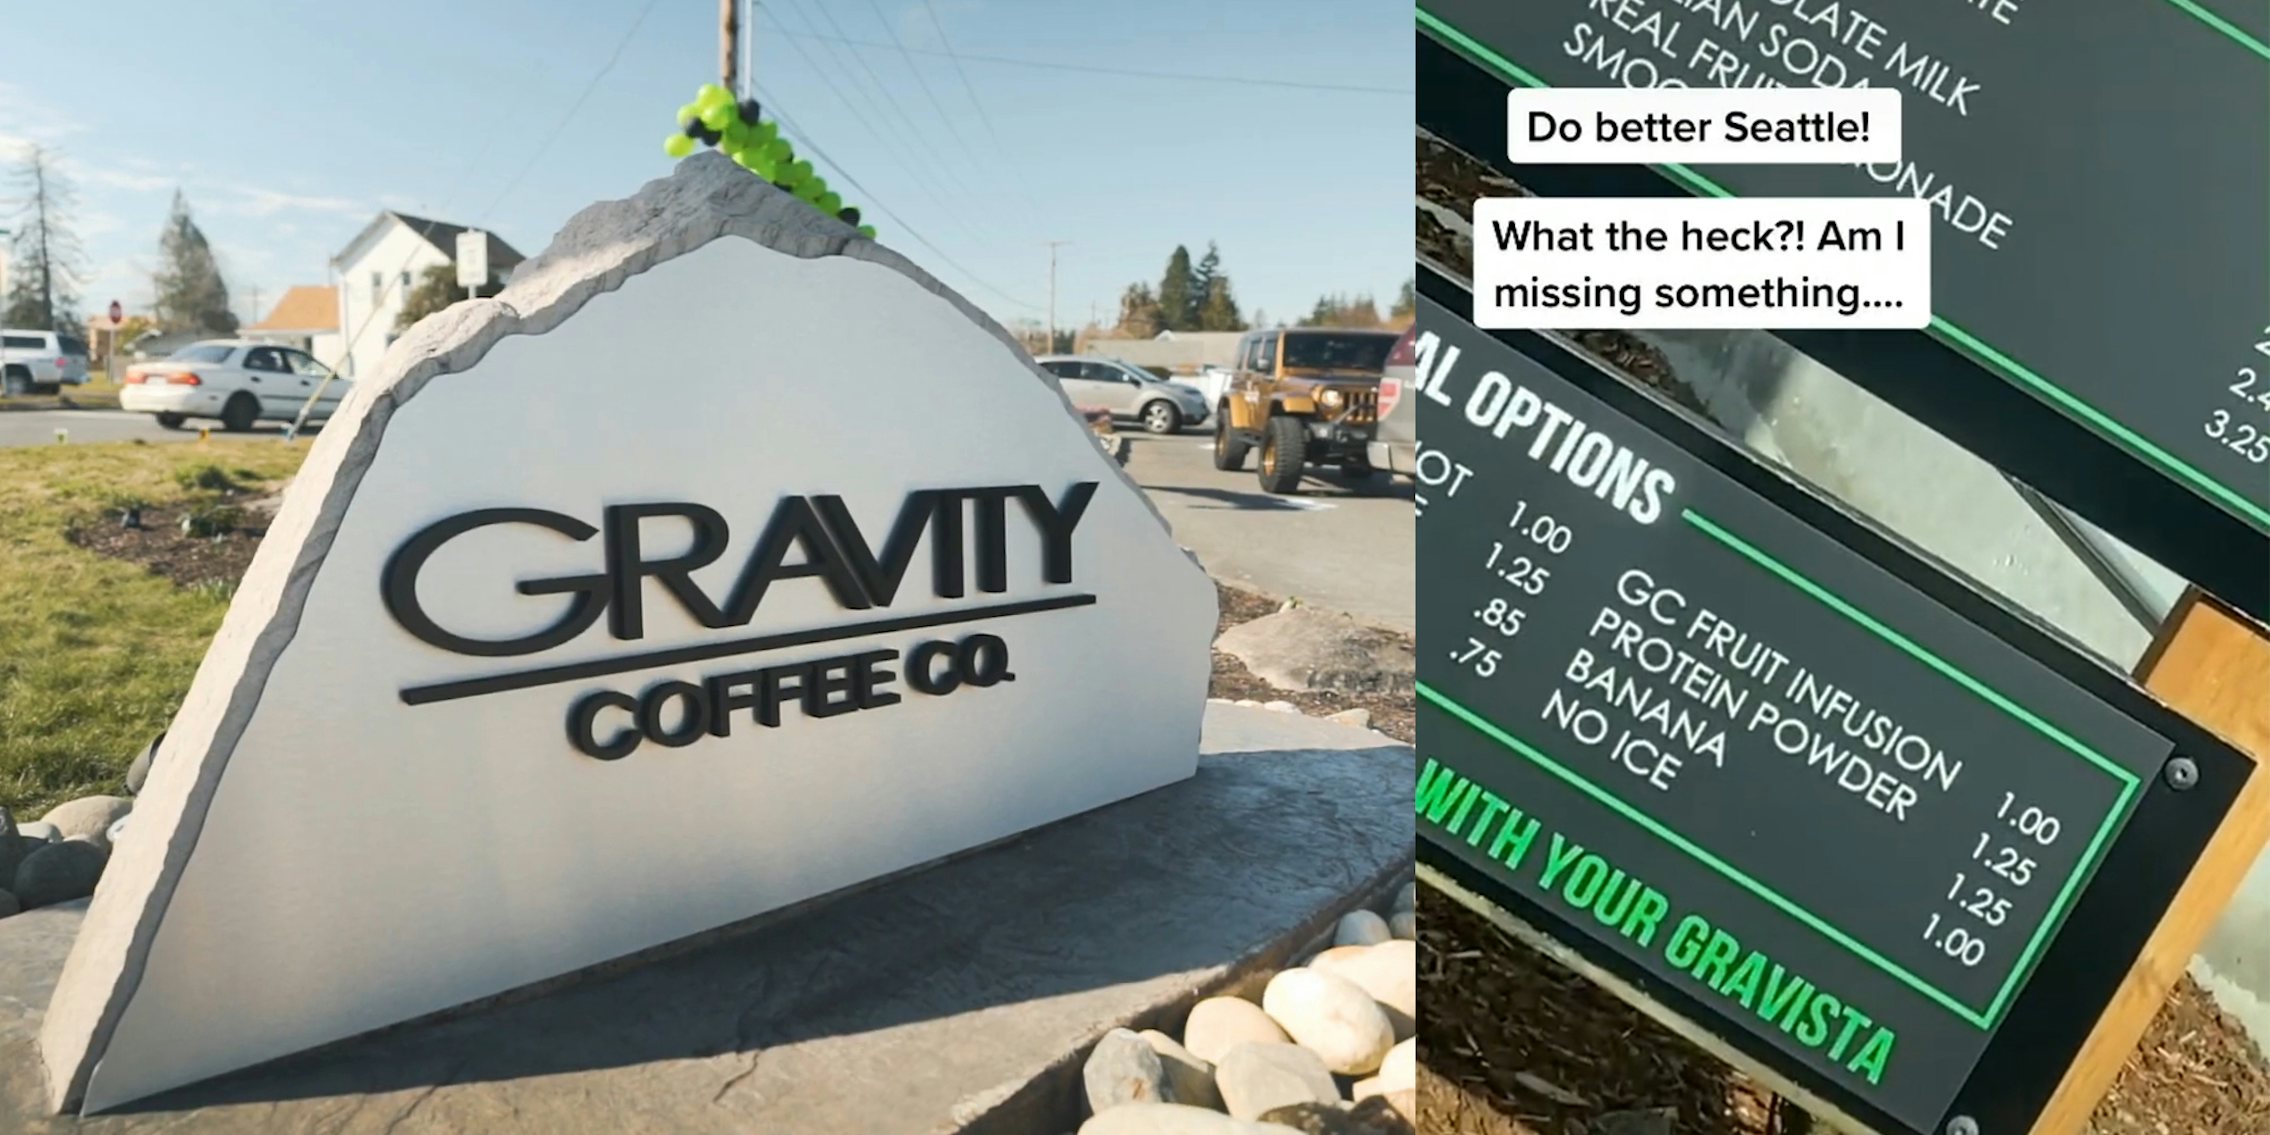 gravity coffee co sign (l) drive thru menu with caption 'do better Seattle! What the heck?! Am I missing something....' (r)